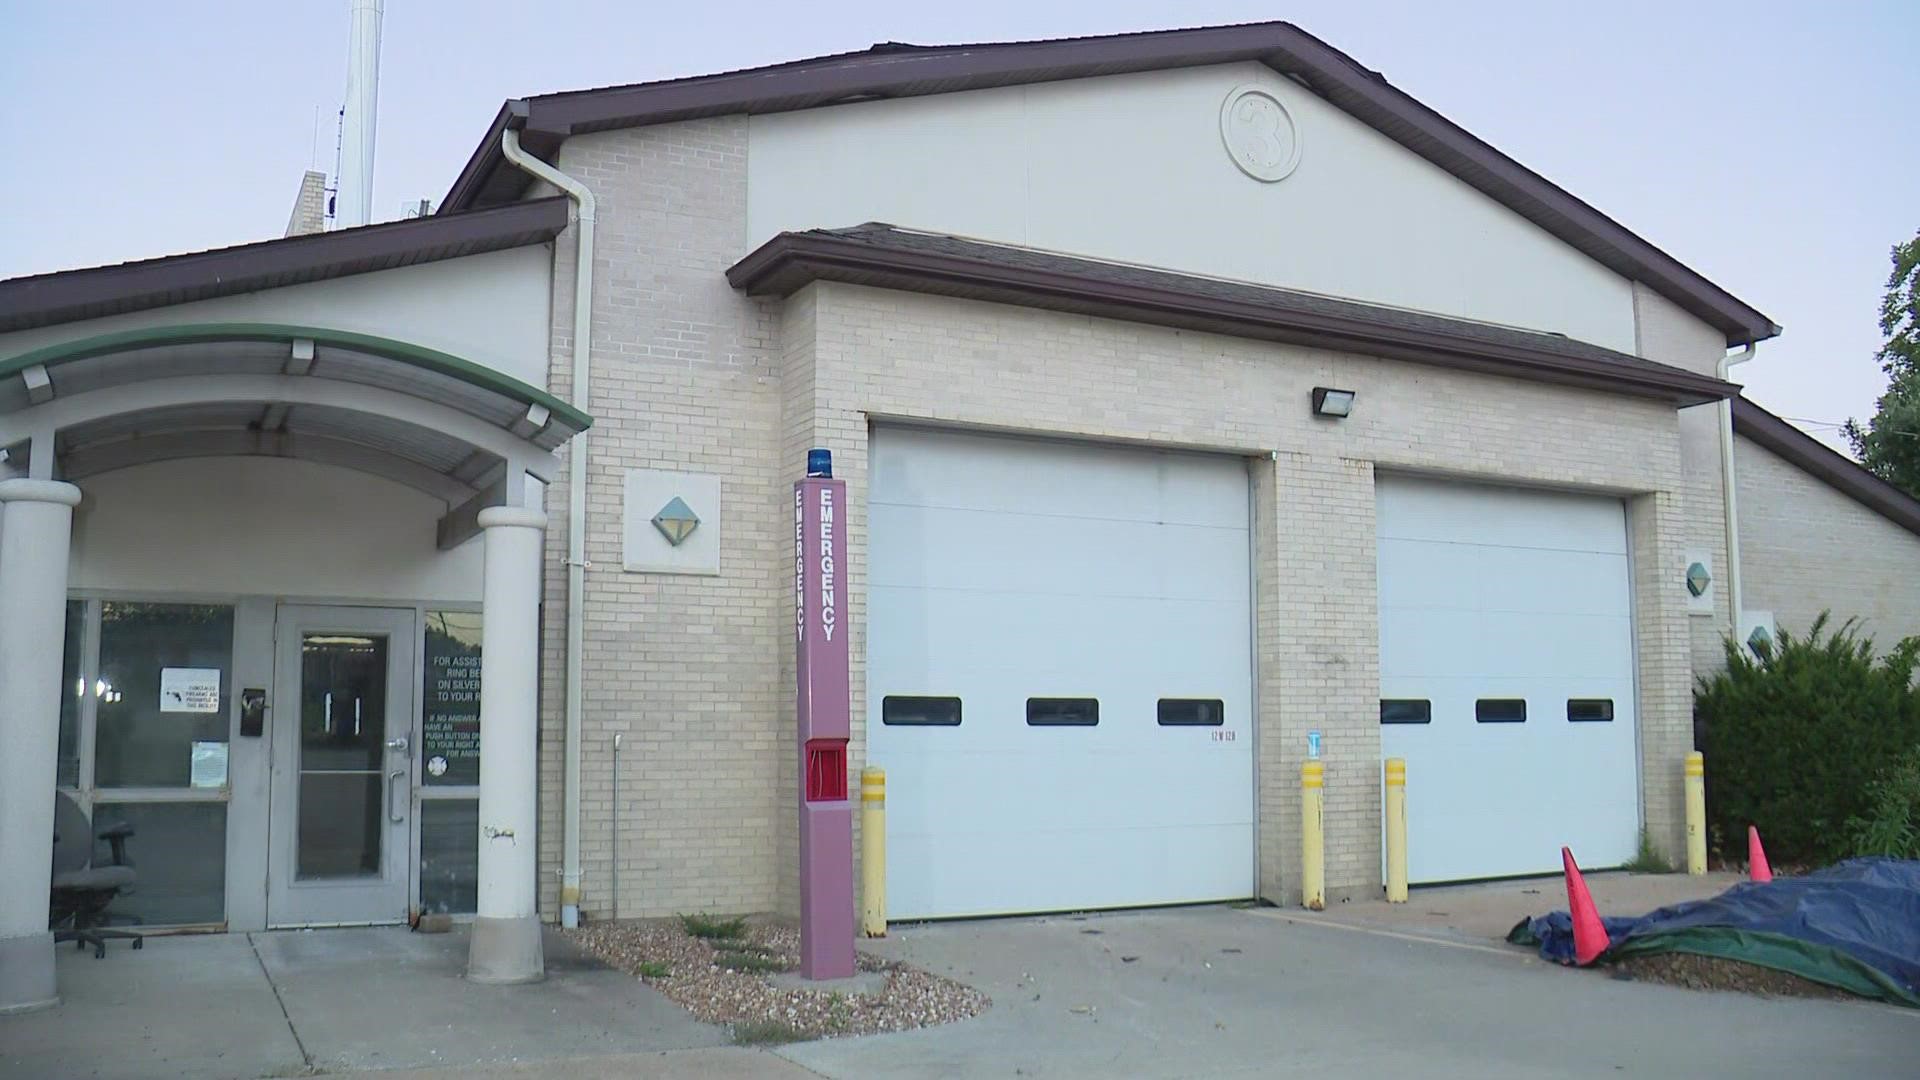 Fire Station 3 will see new upgrades, as the city says the building has structural issues and electrical hazards. The groundbreaking begins at 9 a.m.